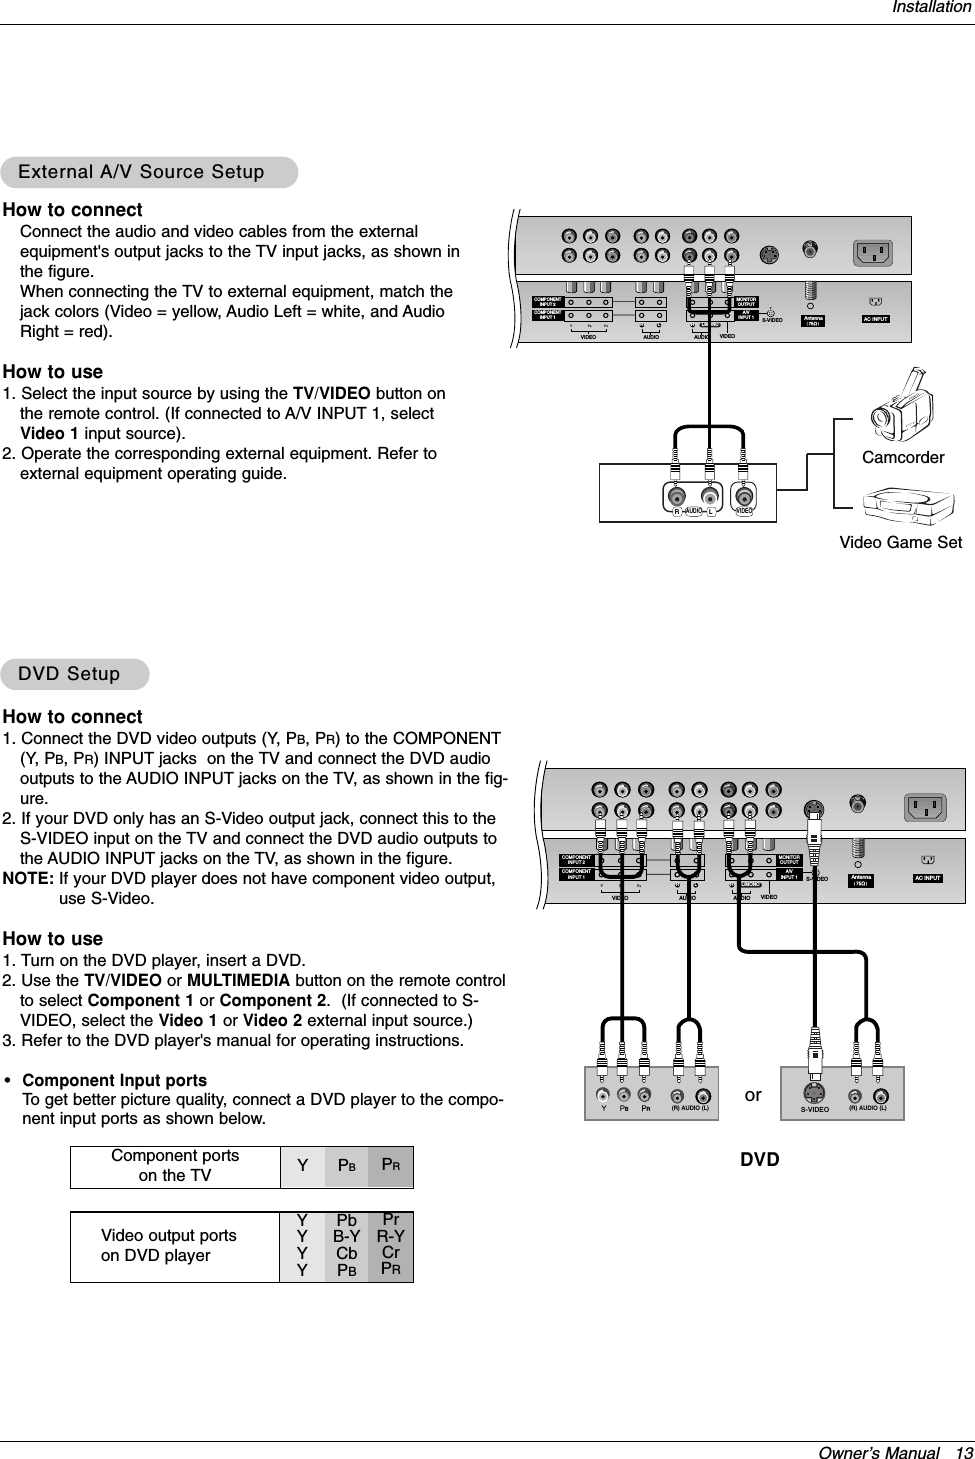 Owner’s Manual   13Installation•Component Input portsTo get better picture quality, connect a DVD player to the compo-nent input ports as shown below.How to connectConnect the audio and video cables from the externalequipment&apos;s output jacks to the TV input jacks, as shown inthe figure. When connecting the TV to external equipment, match thejack colors (Video = yellow, Audio Left = white, and AudioRight = red).How to use1. Select the input source by using the TV/VIDEO button onthe remote control. (If connected to A/V INPUT 1, selectVideo 1 input source).2. Operate the corresponding external equipment. Refer toexternal equipment operating guide.Component ports on the TV YPBPRVideo output ports on DVD playerYYYYPbB-YCbPBPrR-YCrPRHow to connect1. Connect the DVD video outputs (Y, PB, PR) to the COMPONENT(Y, PB, PR) INPUT jacks  on the TV and connect the DVD audiooutputs to the AUDIO INPUT jacks on the TV, as shown in the fig-ure.2. If your DVD only has an S-Video output jack, connect this to theS-VIDEO input on the TV and connect the DVD audio outputs tothe AUDIO INPUT jacks on the TV, as shown in the figure.NOTE: If your DVD player does not have component video output,use S-Video.How to use1. Turn on the DVD player, insert a DVD.2. Use the TV/VIDEO or MULTIMEDIA button on the remote controlto select Component 1 or Component 2.  (If connected to S-VIDEO, select the Video 1 or Video 2 external input source.)3. Refer to the DVD player&apos;s manual for operating instructions.External External A/V Source SetupA/V Source SetupDVD SetupDVD SetupAntennaS-VIDEO AC INPUTAUDIOVIDEOCOMPONENTINPUT 2COMPONENTINPUT 1MONITOROUTPUTA/VINPUT 1RLAUDIO VIDEORL/MONORLAUDIO VIDEOAntennaS-VIDEO AC INPUTAUDIOVIDEOCOMPONENTINPUT 2COMPONENTINPUT 1MONITOROUTPUTA/VINPUT 1RLAUDIO VIDEORL/MONOBR(R) AUDIO (L) (R) AUDIO (L)S-VIDEODVDorCamcorderVideo Game Set